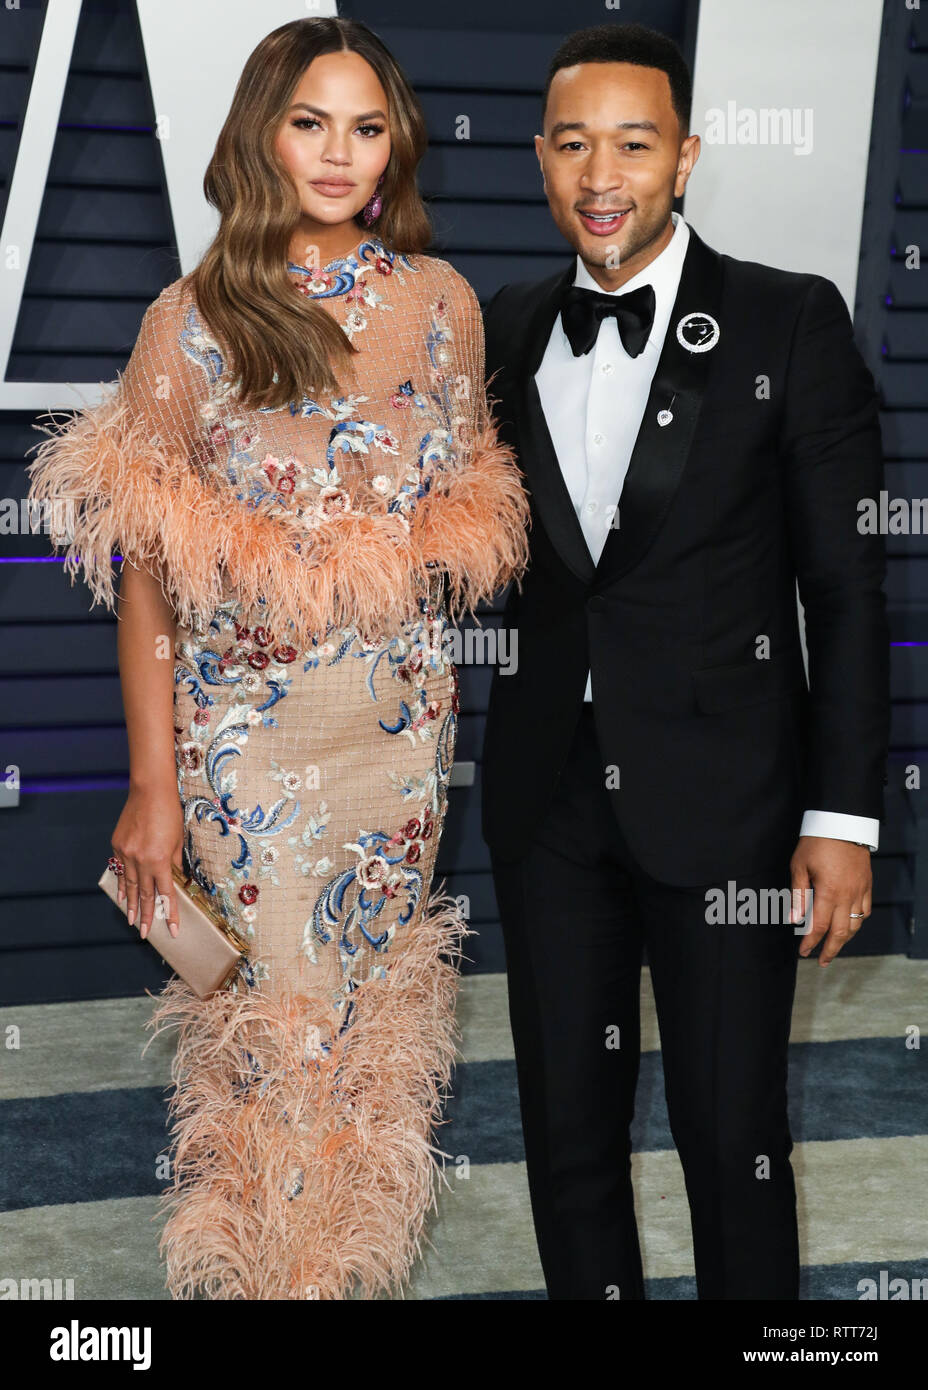 BEVERLY HILLS, LOS ANGELES, CA, USA - FEBRUARY 24: Model Chrissy Teigen and husband/singer John Legend arrive at the 2019 Vanity Fair Oscar Party held at the Wallis Annenberg Center for the Performing Arts on February 24, 2019 in Beverly Hills, Los Angeles, California, United States. (Photo by Xavier Collin/Image Press Agency) Stock Photo